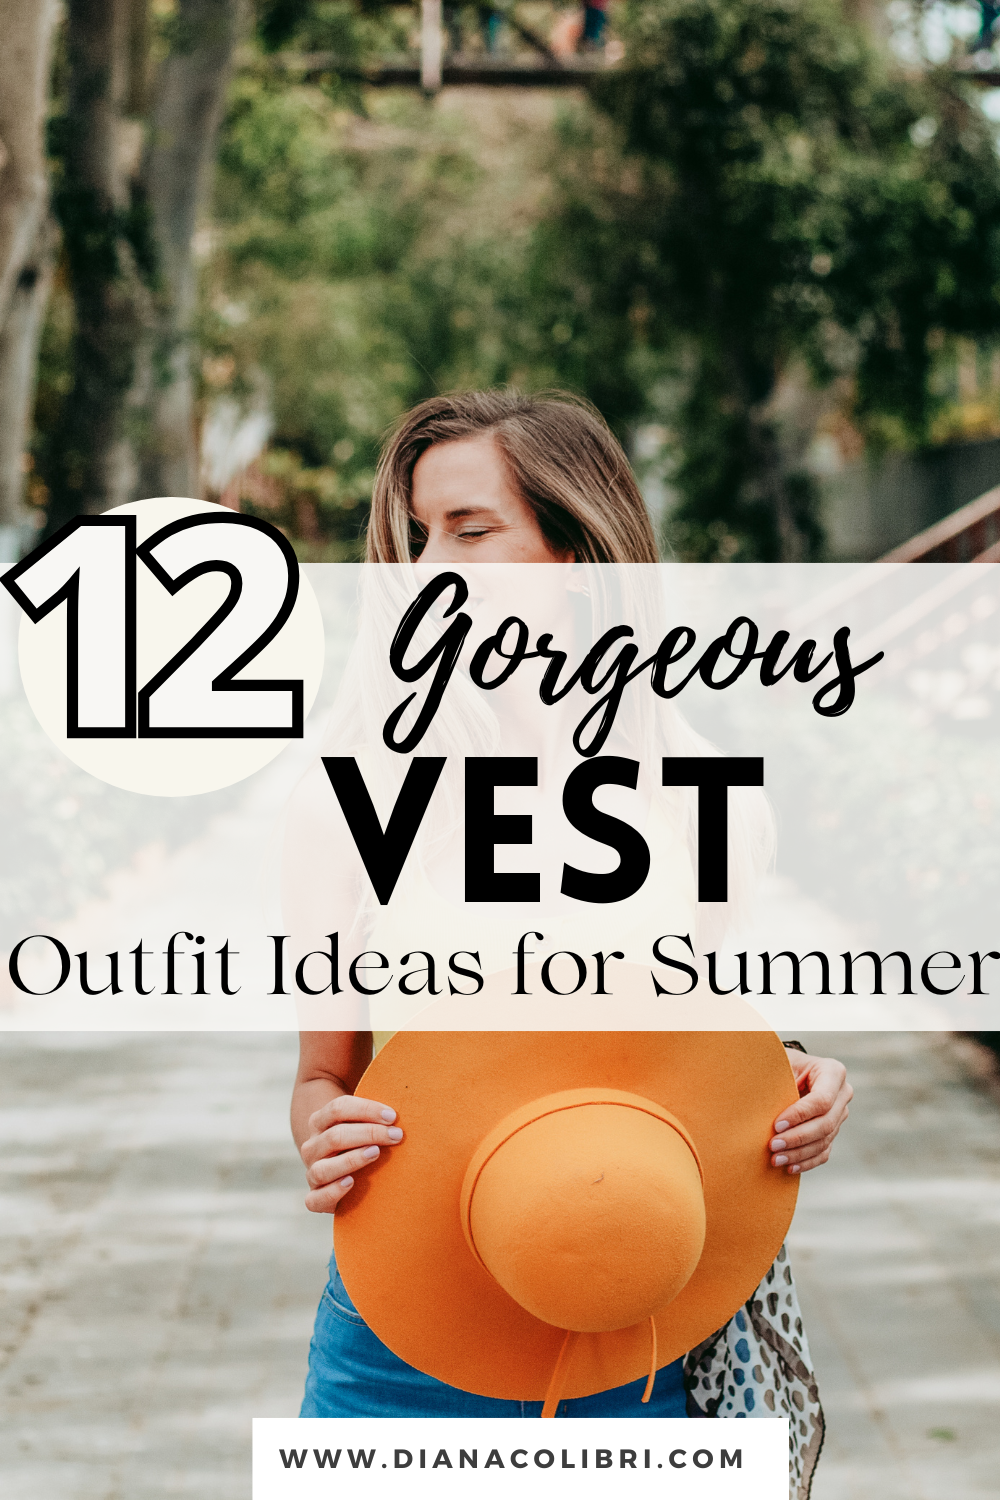 12 Casual Chic Vest Outfits to Wear this Summer